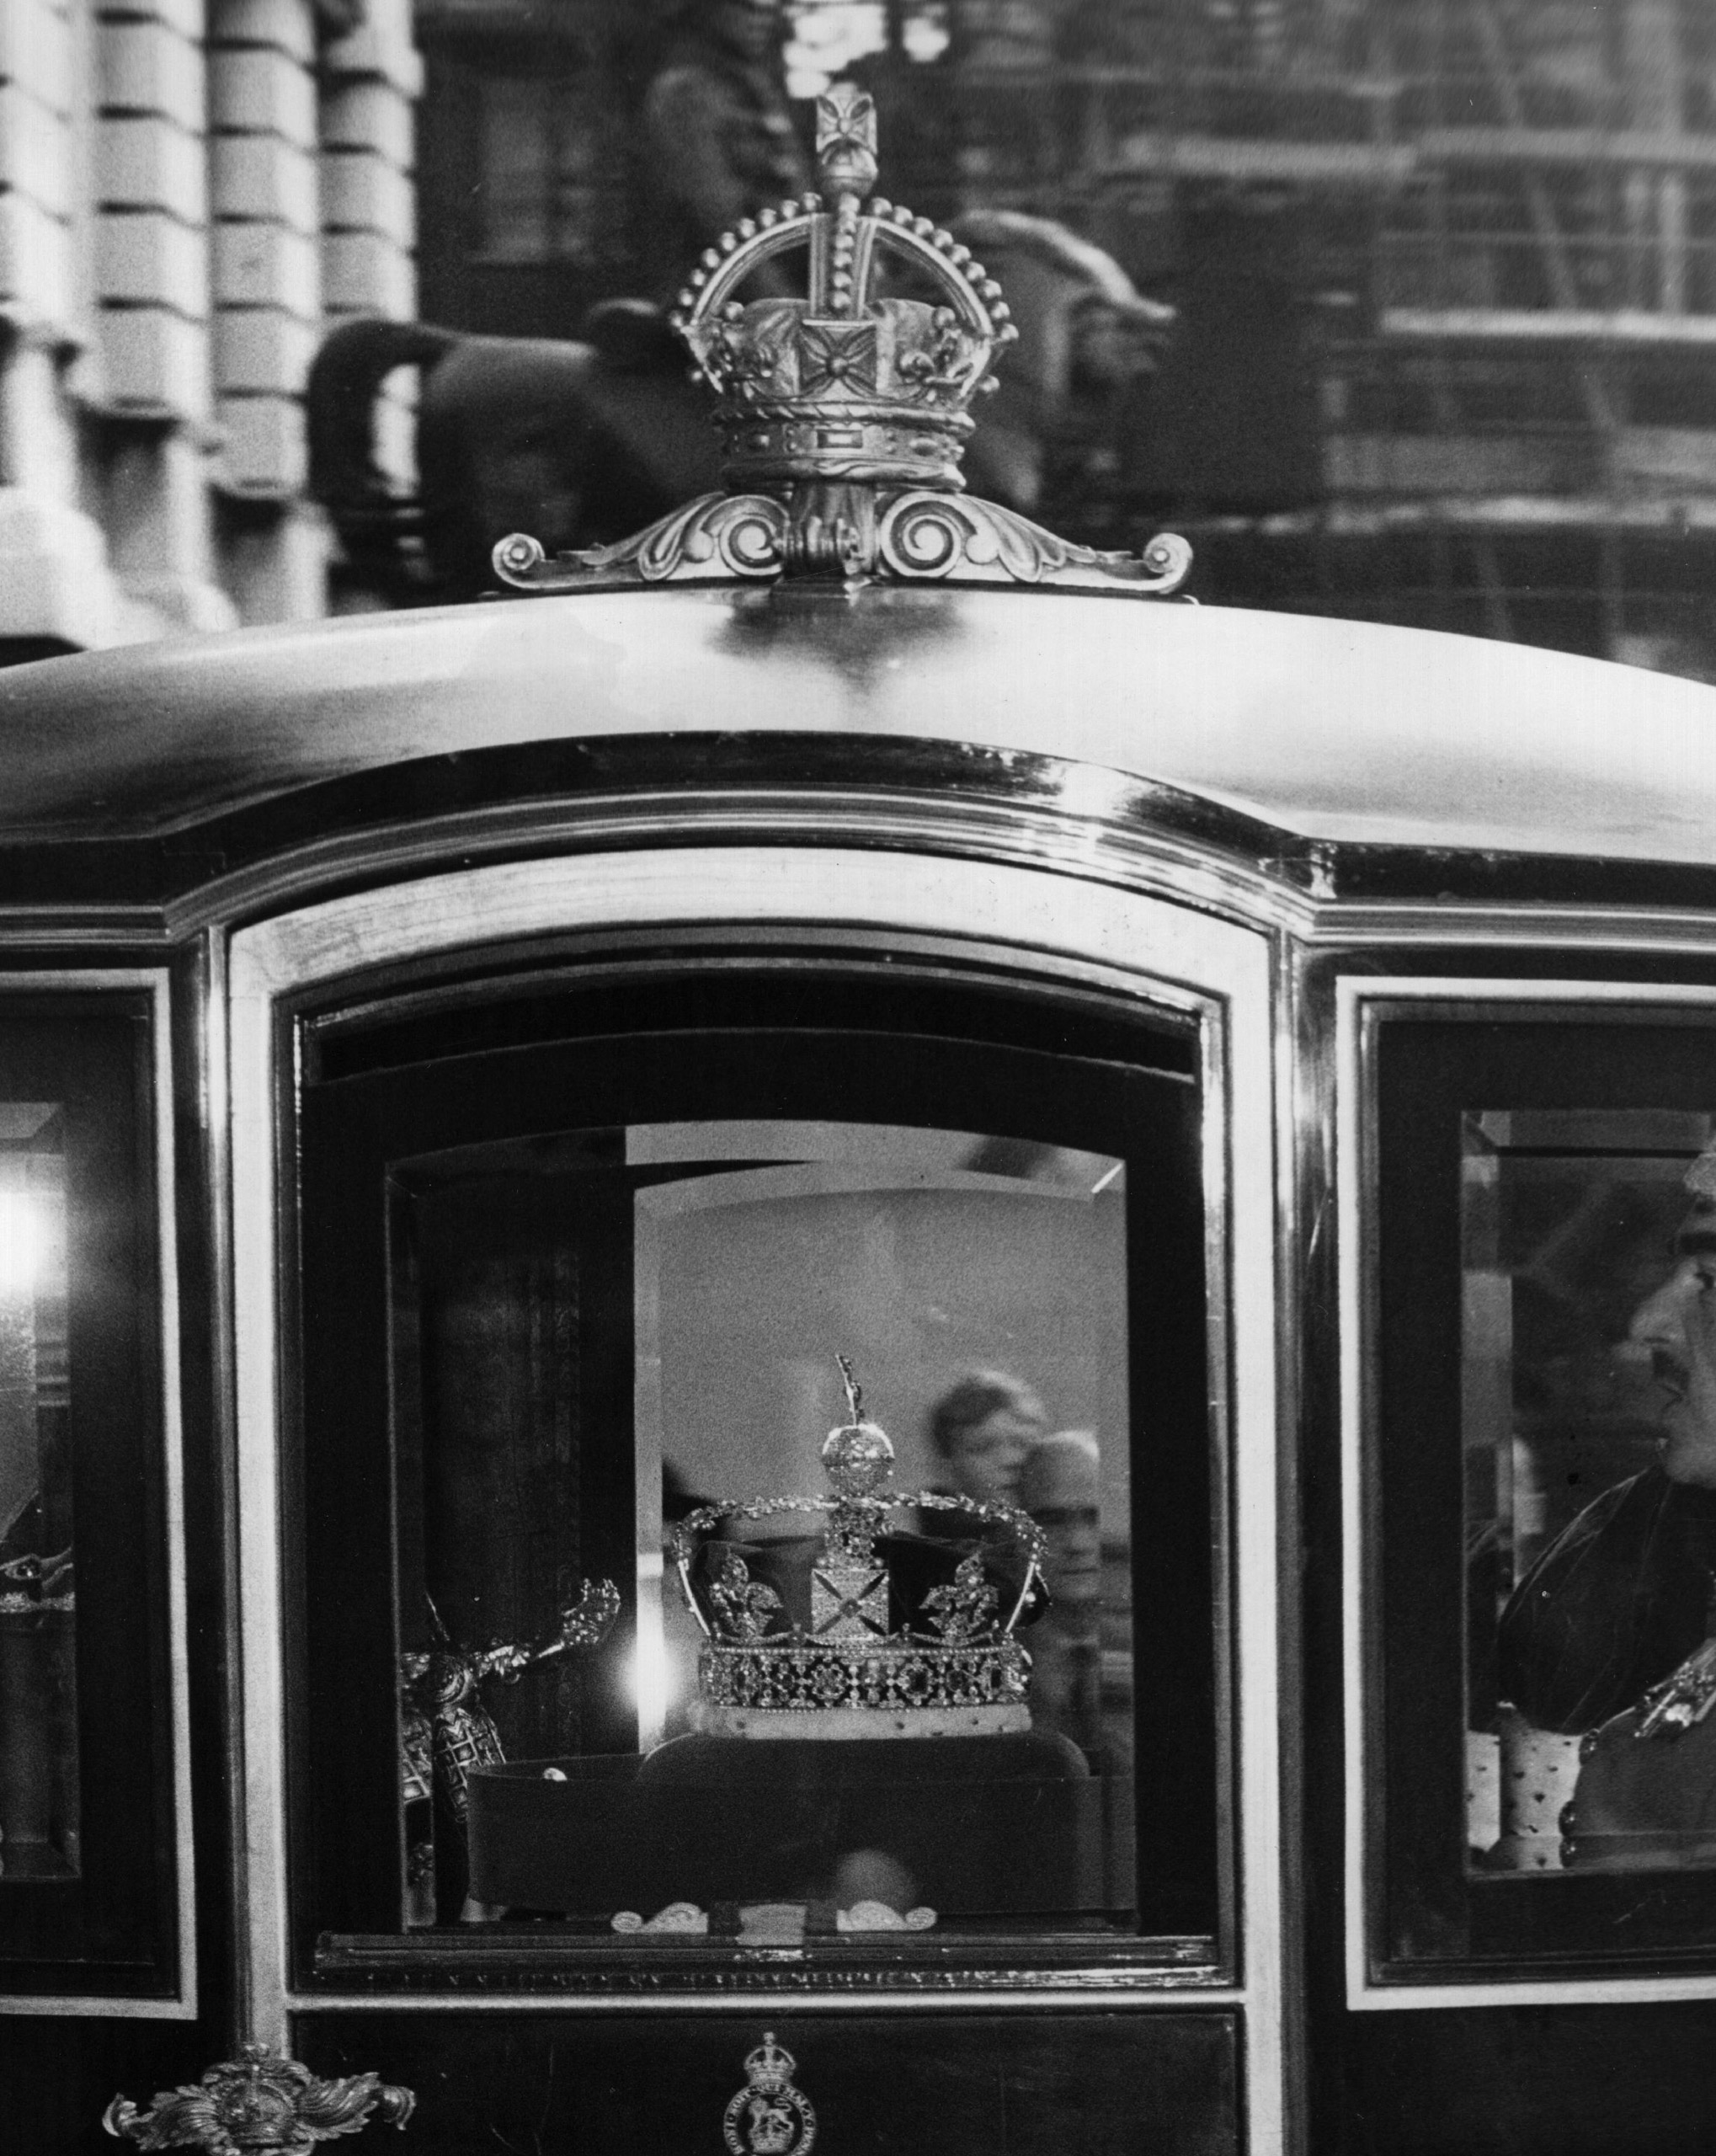 The Imperial State Crown lit by special spot lights in the Queen Alexandra's State Carriage as it precedes the Queen on her way to the State Opening of Parliament, 1962.